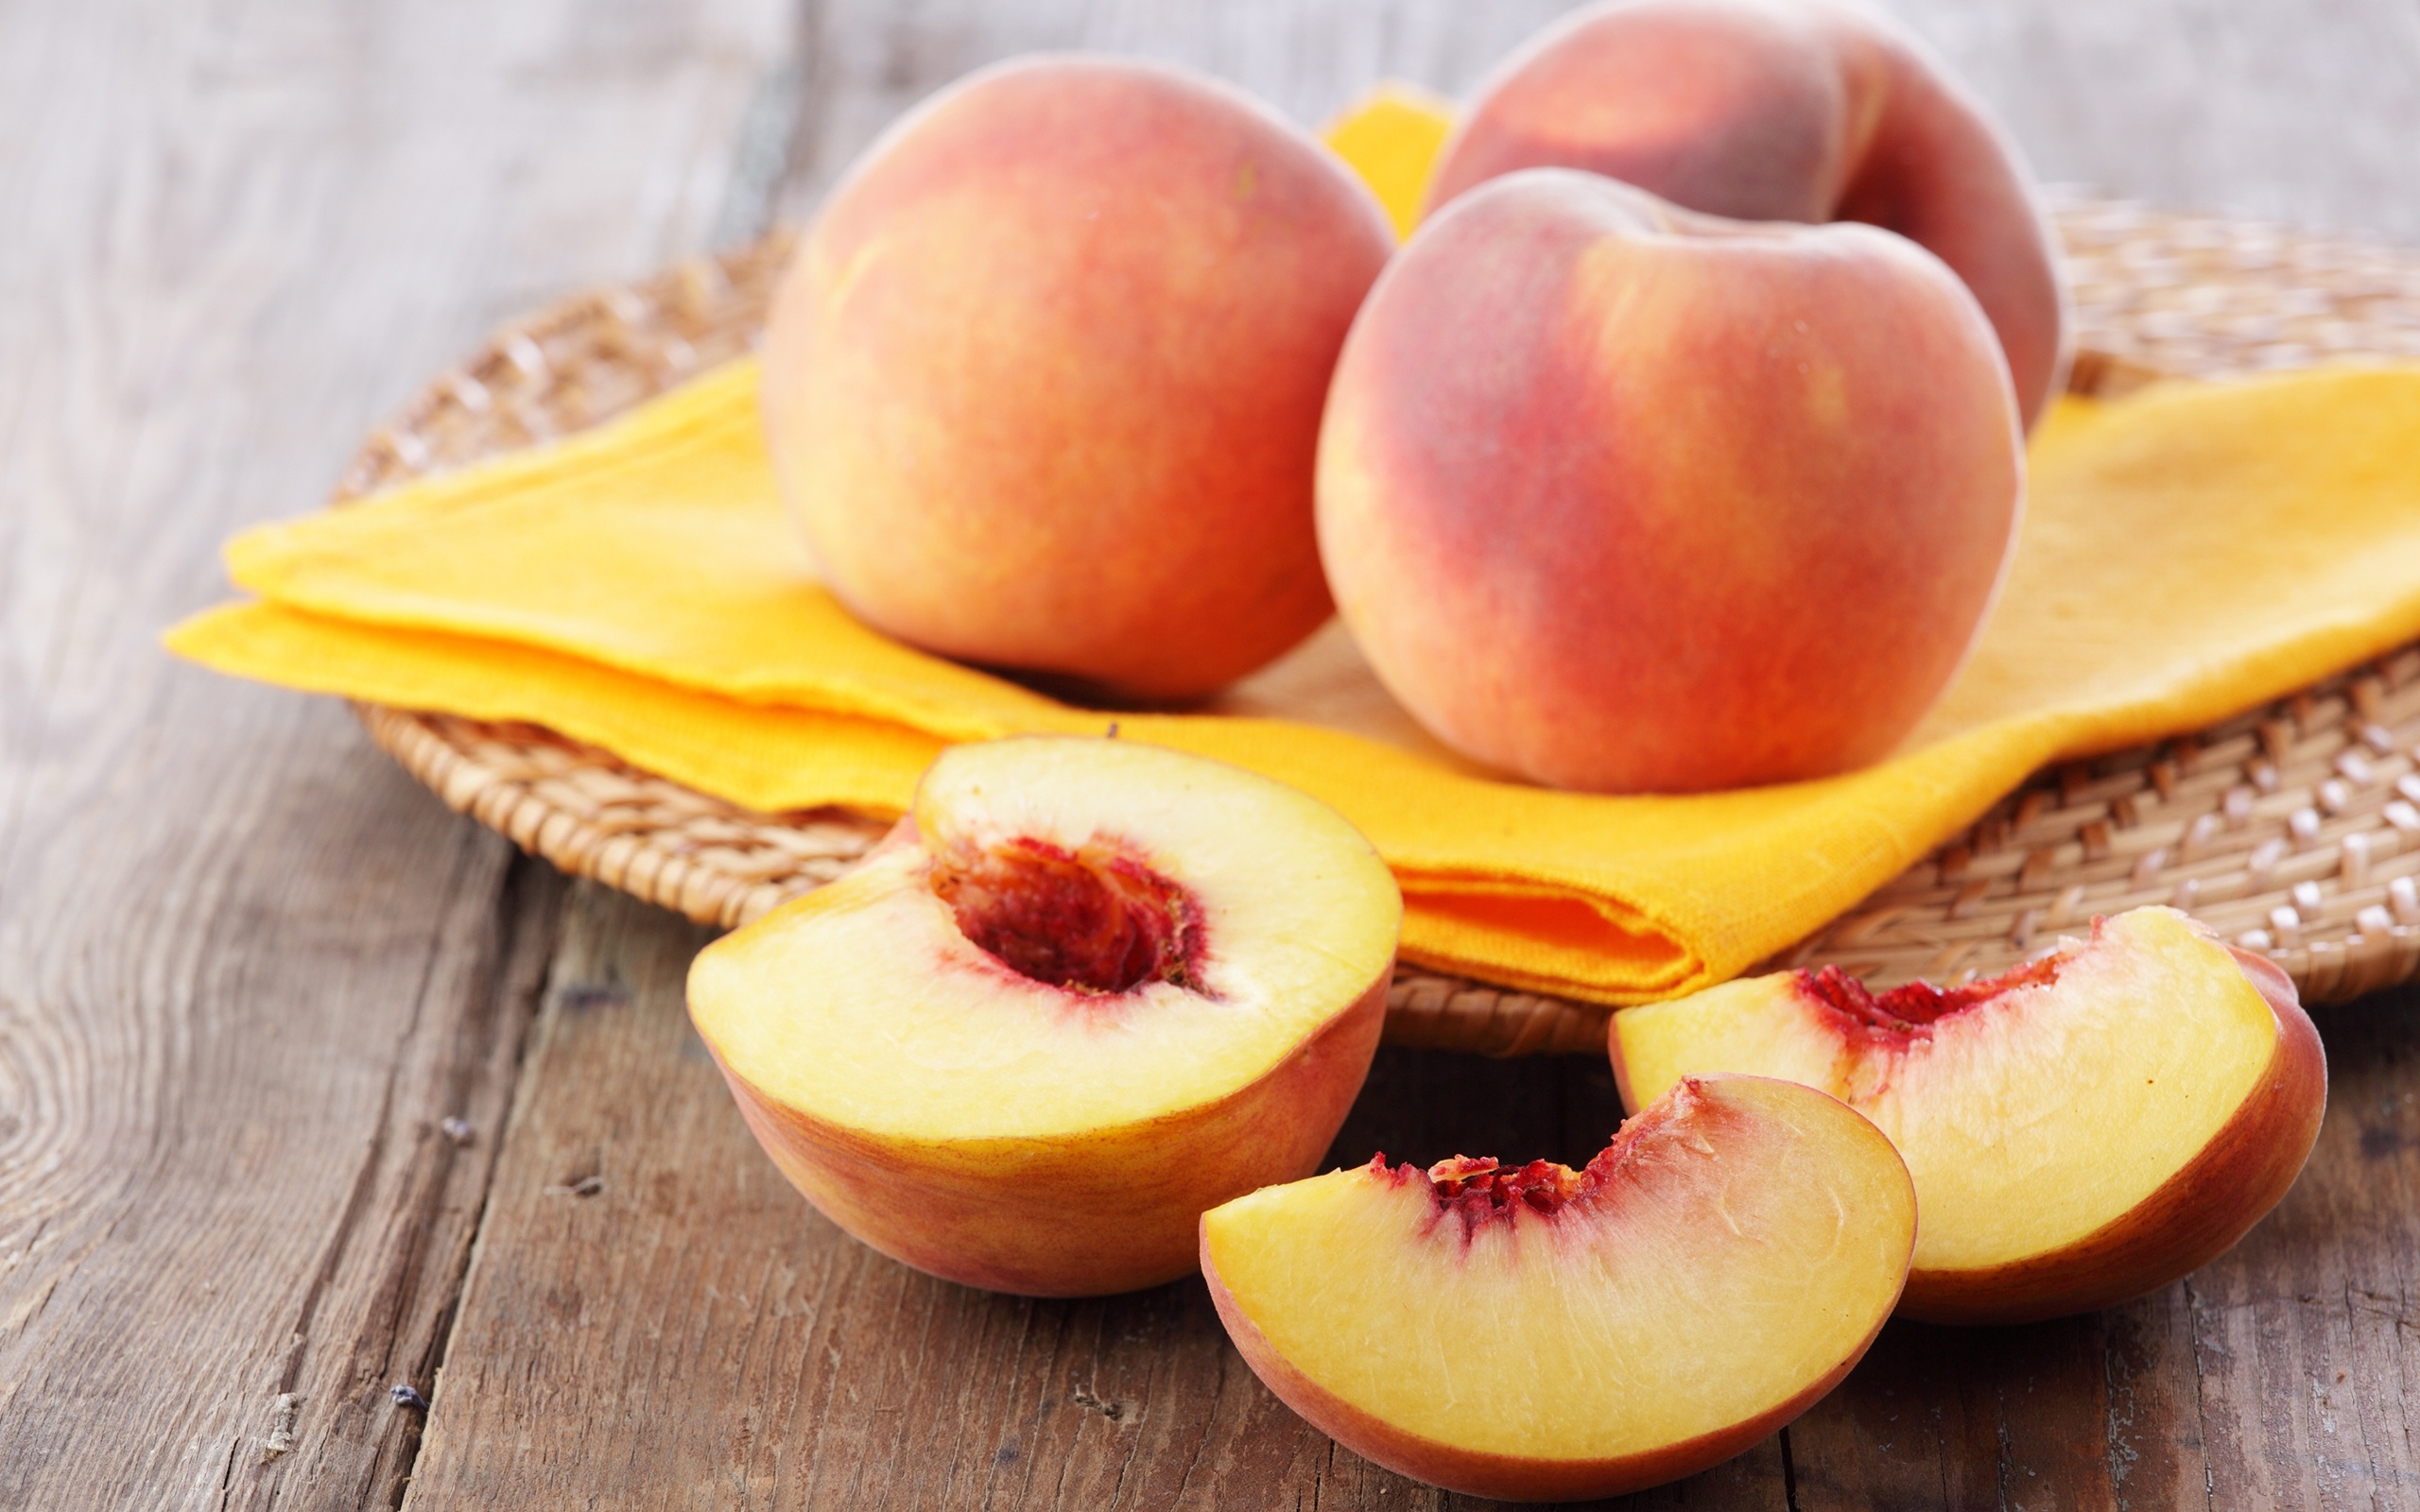 Peach: Native to China, Widely cultivated throughout temperate regions. 2560x1600 HD Wallpaper.